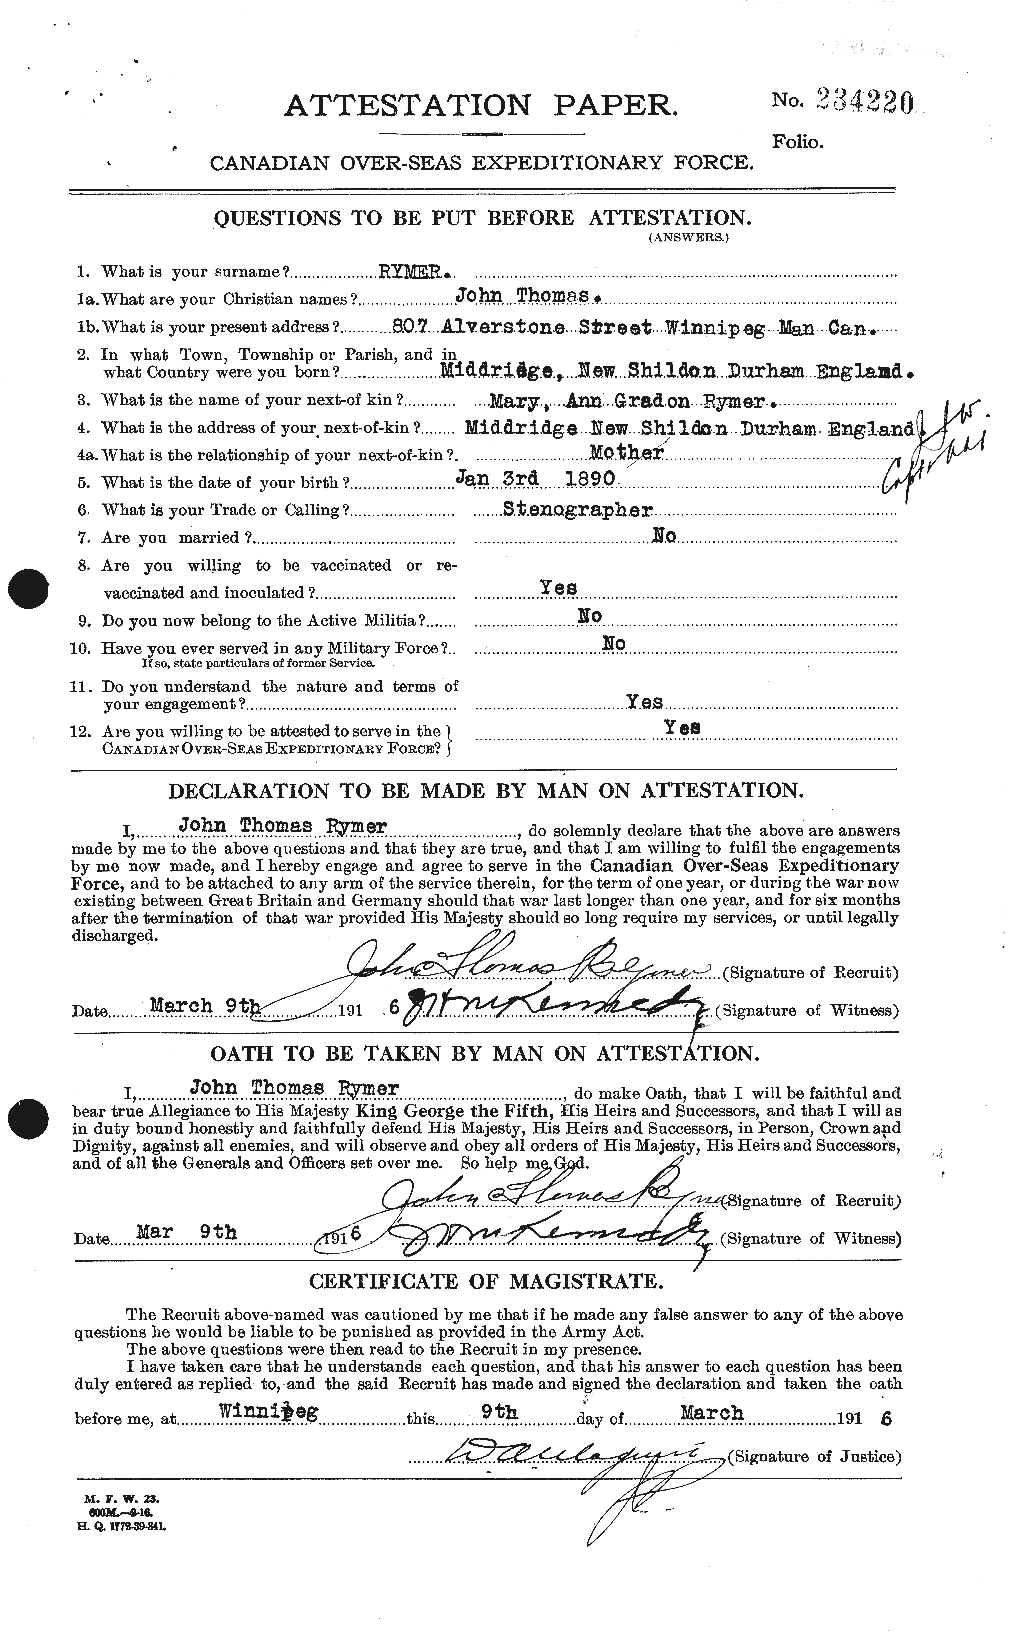 Personnel Records of the First World War - CEF 624129a